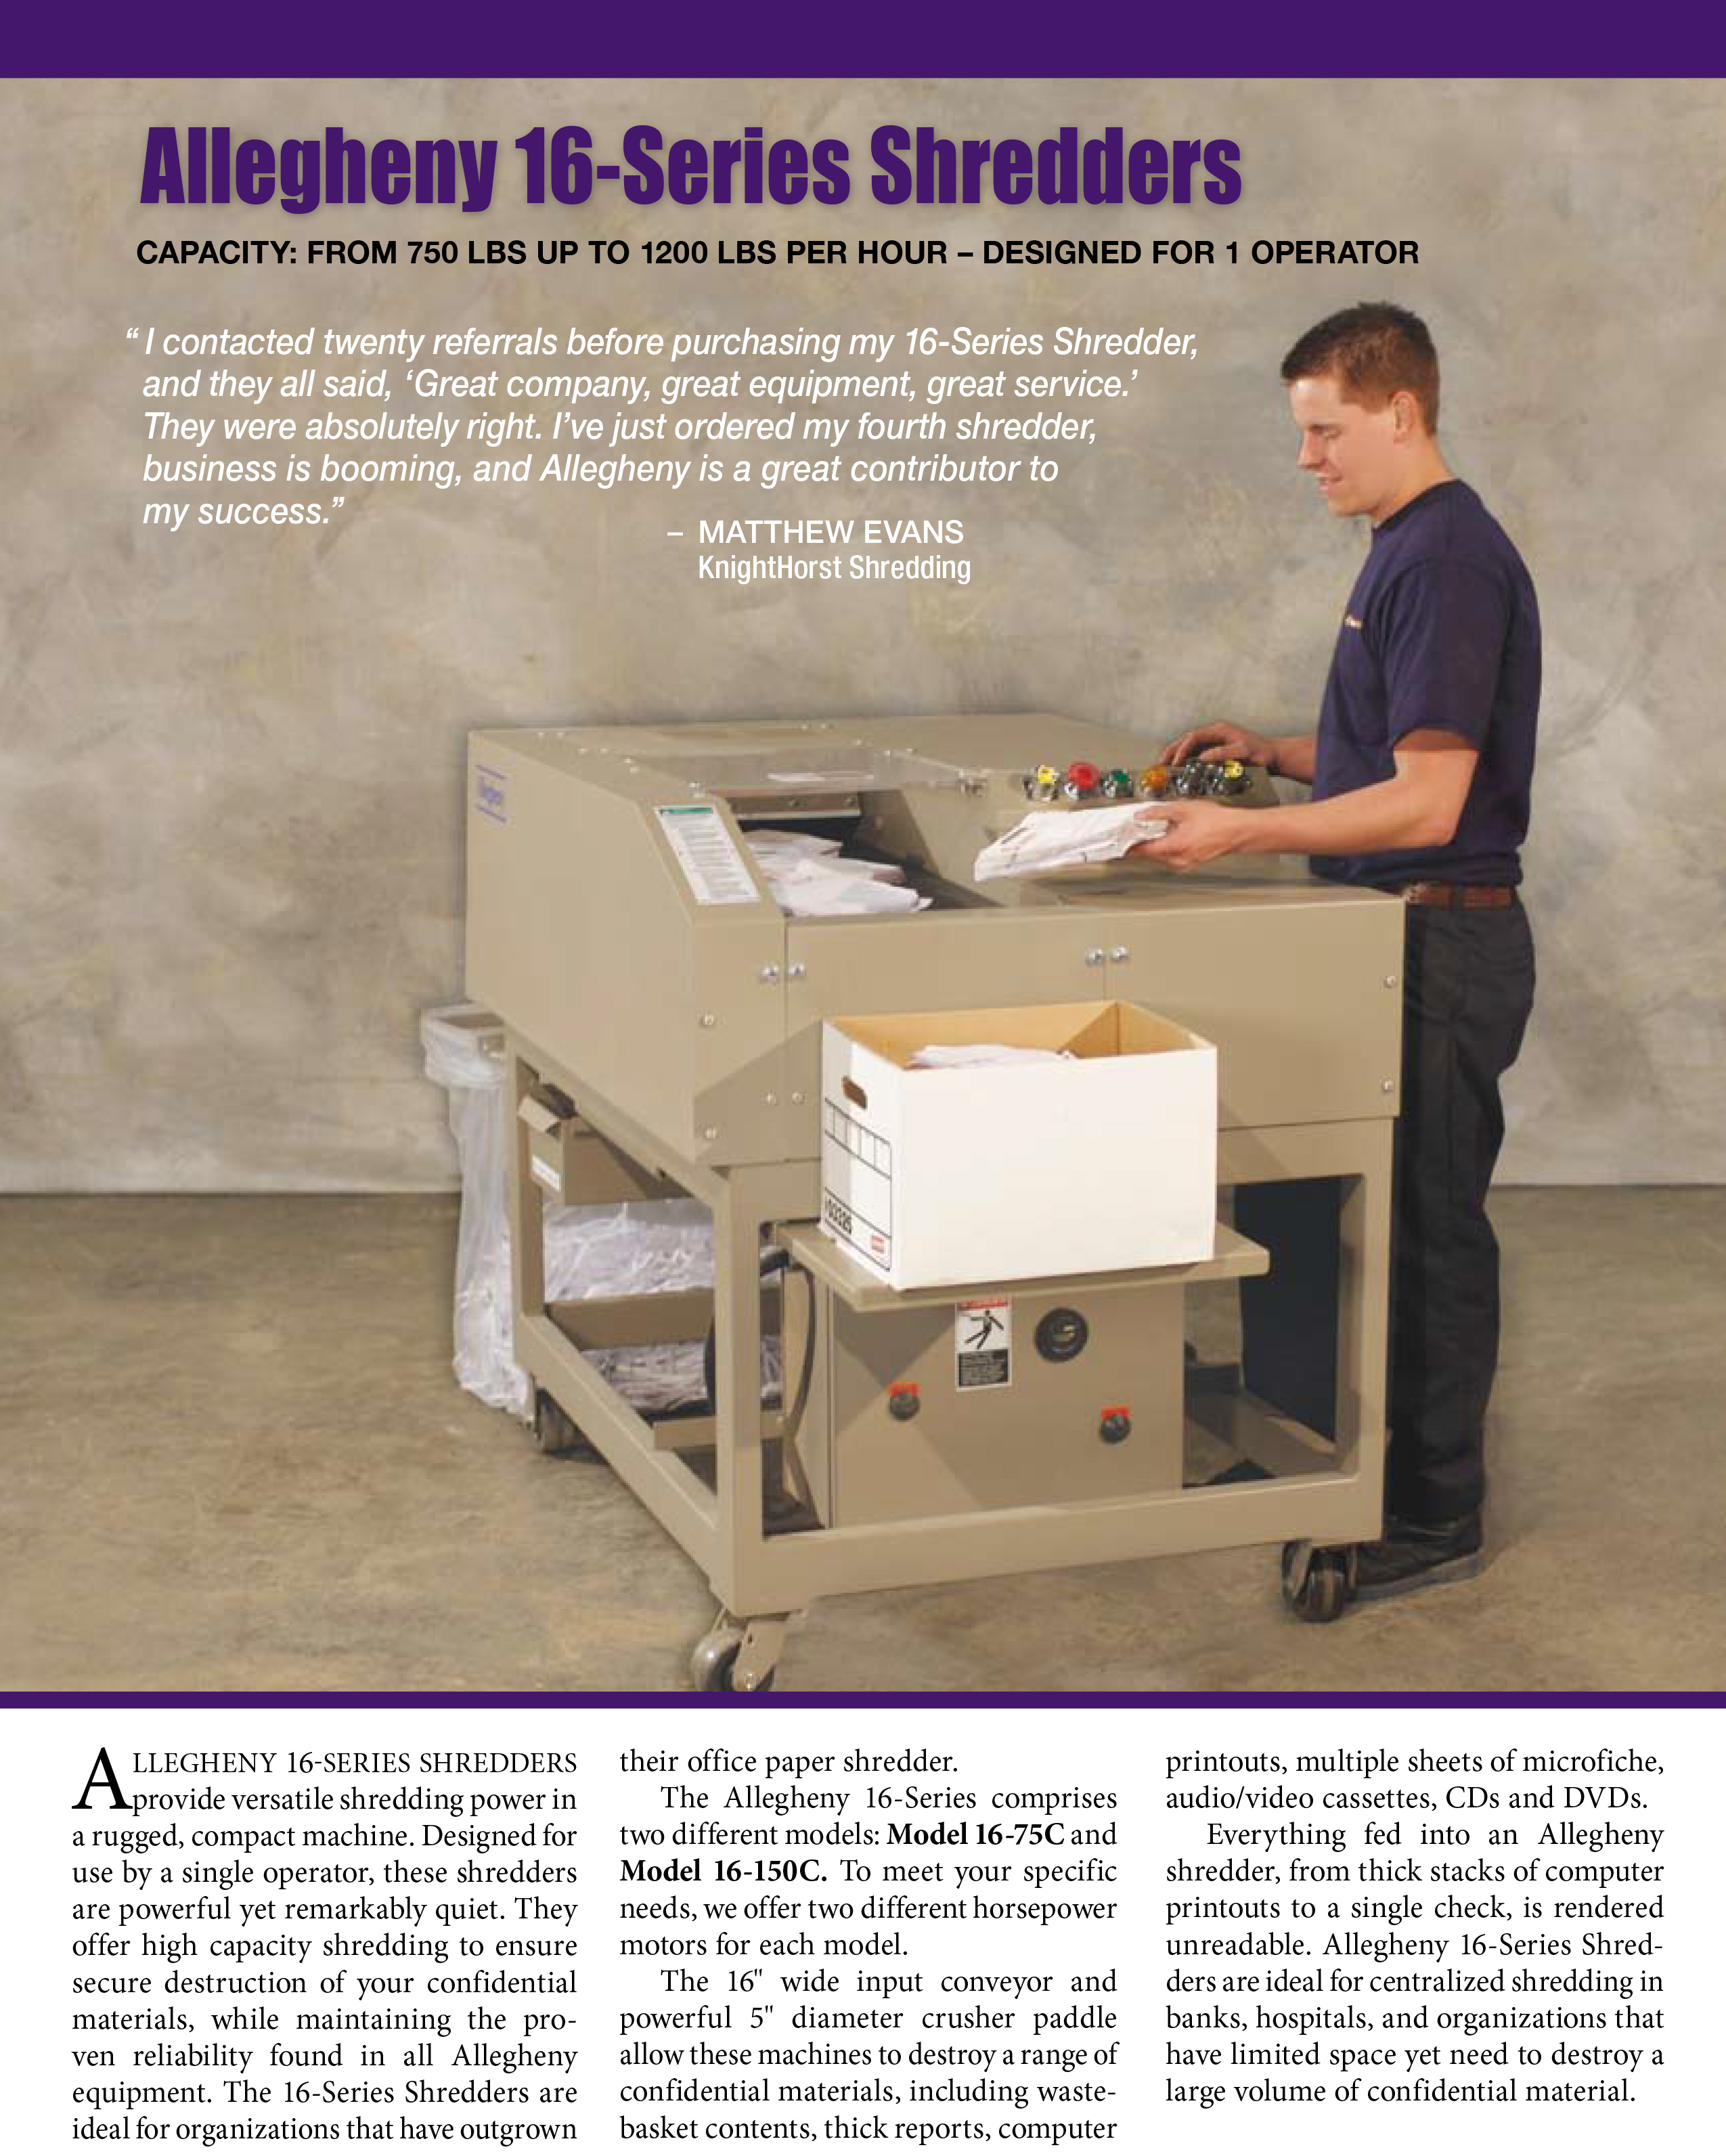 Learn more about the 16 Series Shredders in the Allegheny Brochure.